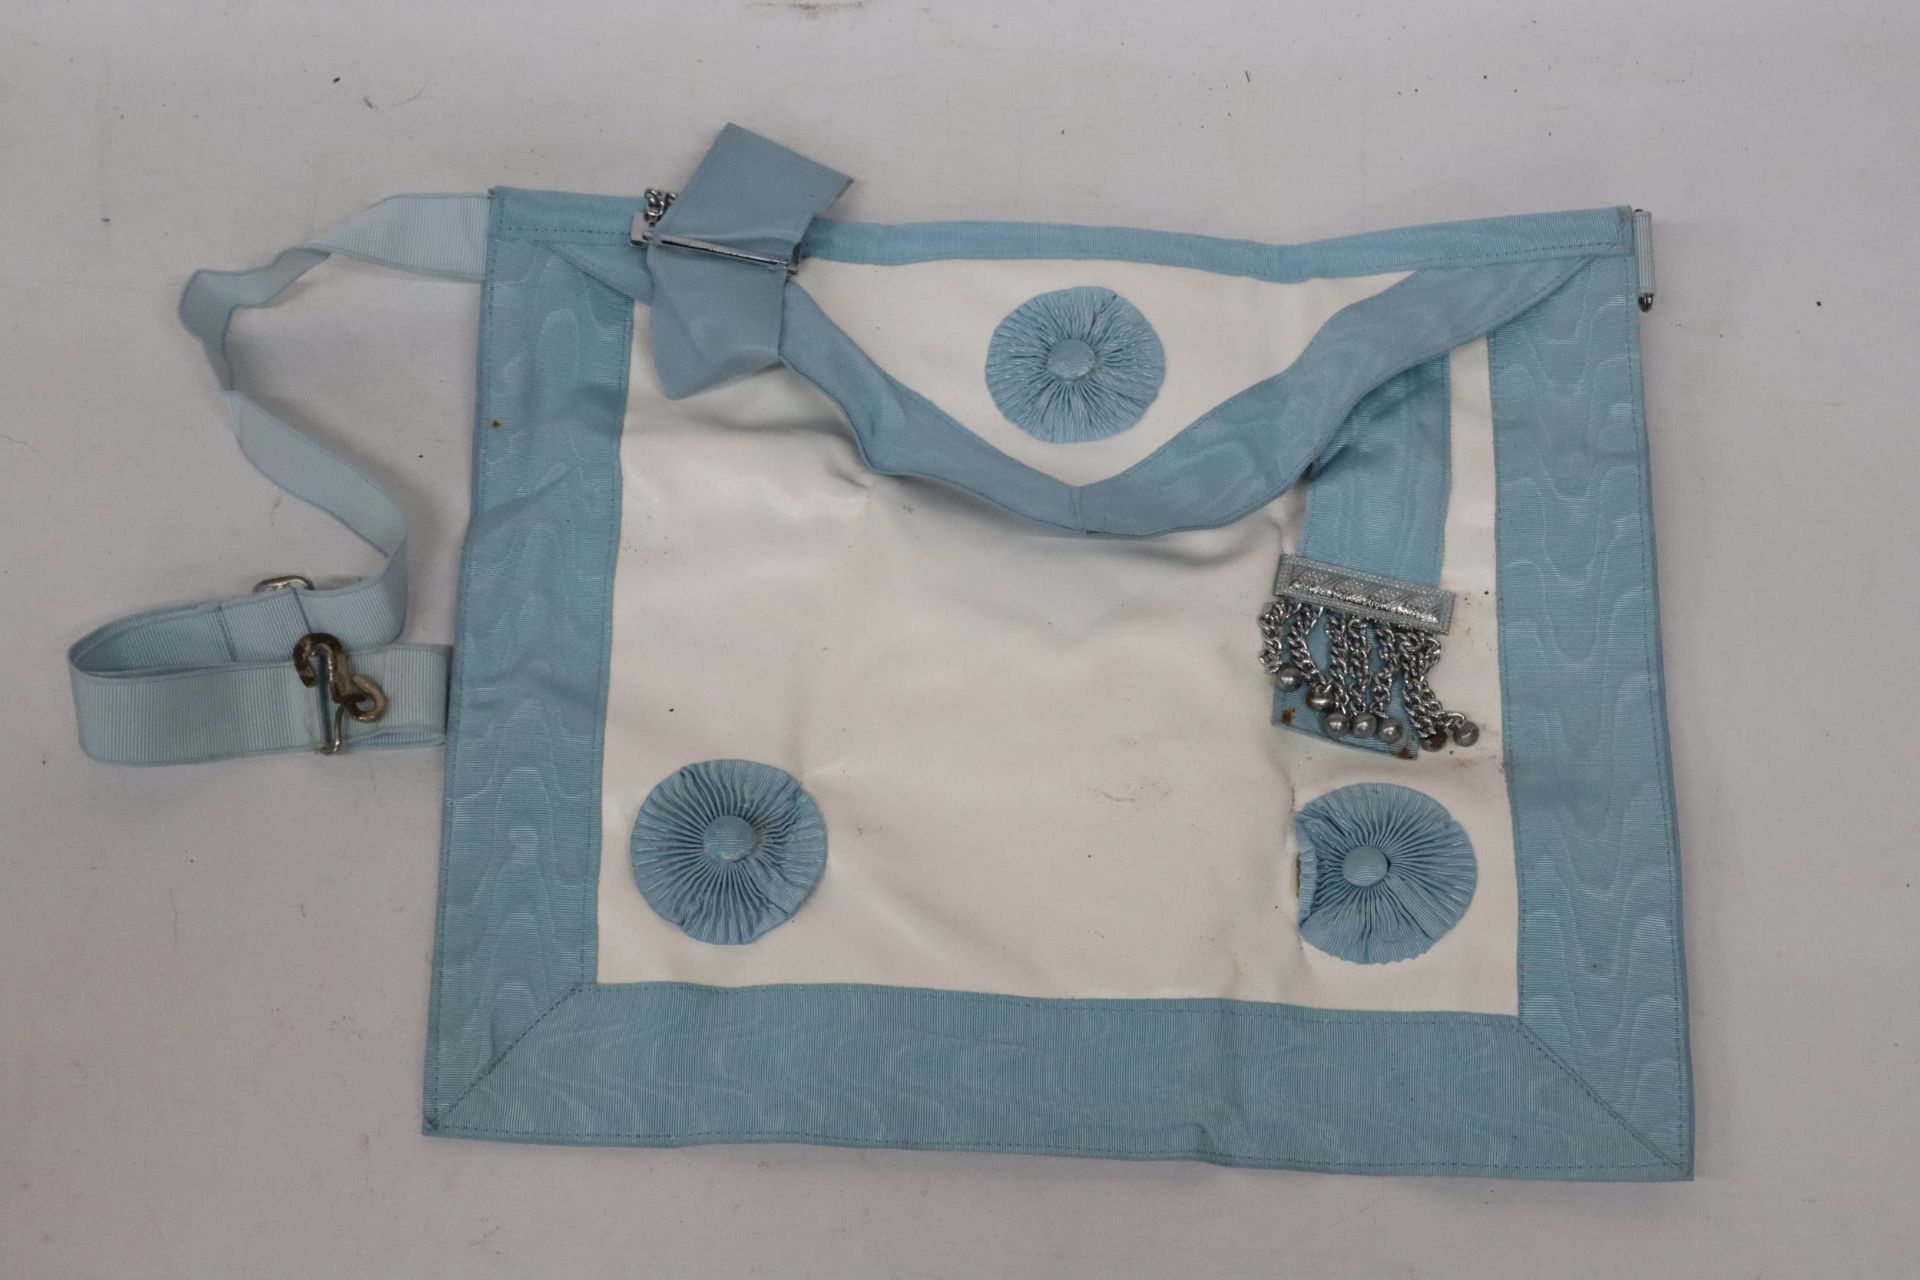 A MASONIMC APRON IN A LEATHER POUCH BELONGED TO BRO. A. DALE, GOULBURN LODGE, NO. 8478 - Image 3 of 5